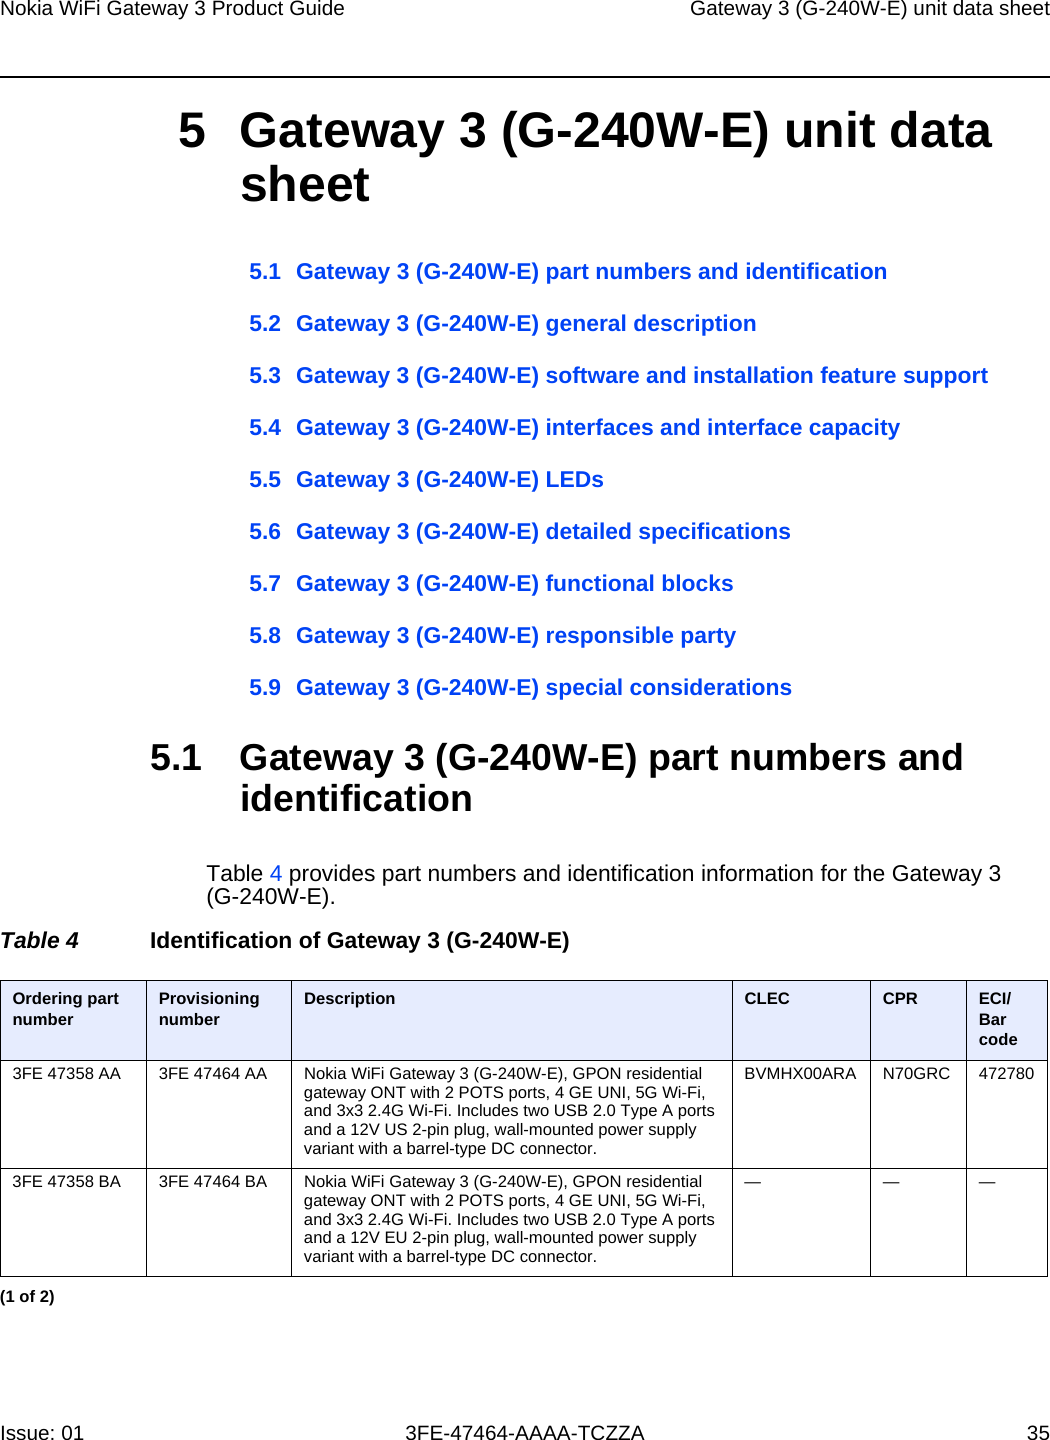 Nokia WiFi Gateway 3 Product Guide Gateway 3 (G-240W-E) unit data sheetIssue: 01 3FE-47464-AAAA-TCZZA 35 5 Gateway 3 (G-240W-E) unit data sheet5.1 Gateway 3 (G-240W-E) part numbers and identification5.2 Gateway 3 (G-240W-E) general description5.3 Gateway 3 (G-240W-E) software and installation feature support5.4 Gateway 3 (G-240W-E) interfaces and interface capacity5.5 Gateway 3 (G-240W-E) LEDs5.6 Gateway 3 (G-240W-E) detailed specifications5.7 Gateway 3 (G-240W-E) functional blocks5.8 Gateway 3 (G-240W-E) responsible party5.9 Gateway 3 (G-240W-E) special considerations5.1 Gateway 3 (G-240W-E) part numbers and identificationTable 4 provides part numbers and identification information for the Gateway 3 (G-240W-E).Table 4 Identification of Gateway 3 (G-240W-E)Ordering part number Provisioning number Description CLEC CPR ECI/Bar code3FE 47358 AA 3FE 47464 AA Nokia WiFi Gateway 3 (G-240W-E), GPON residential gateway ONT with 2 POTS ports, 4 GE UNI, 5G Wi-Fi, and 3x3 2.4G Wi-Fi. Includes two USB 2.0 Type A ports and a 12V US 2-pin plug, wall-mounted power supply variant with a barrel-type DC connector.BVMHX00ARA N70GRC 4727803FE 47358 BA 3FE 47464 BA Nokia WiFi Gateway 3 (G-240W-E), GPON residential gateway ONT with 2 POTS ports, 4 GE UNI, 5G Wi-Fi, and 3x3 2.4G Wi-Fi. Includes two USB 2.0 Type A ports and a 12V EU 2-pin plug, wall-mounted power supply variant with a barrel-type DC connector.———(1 of 2)